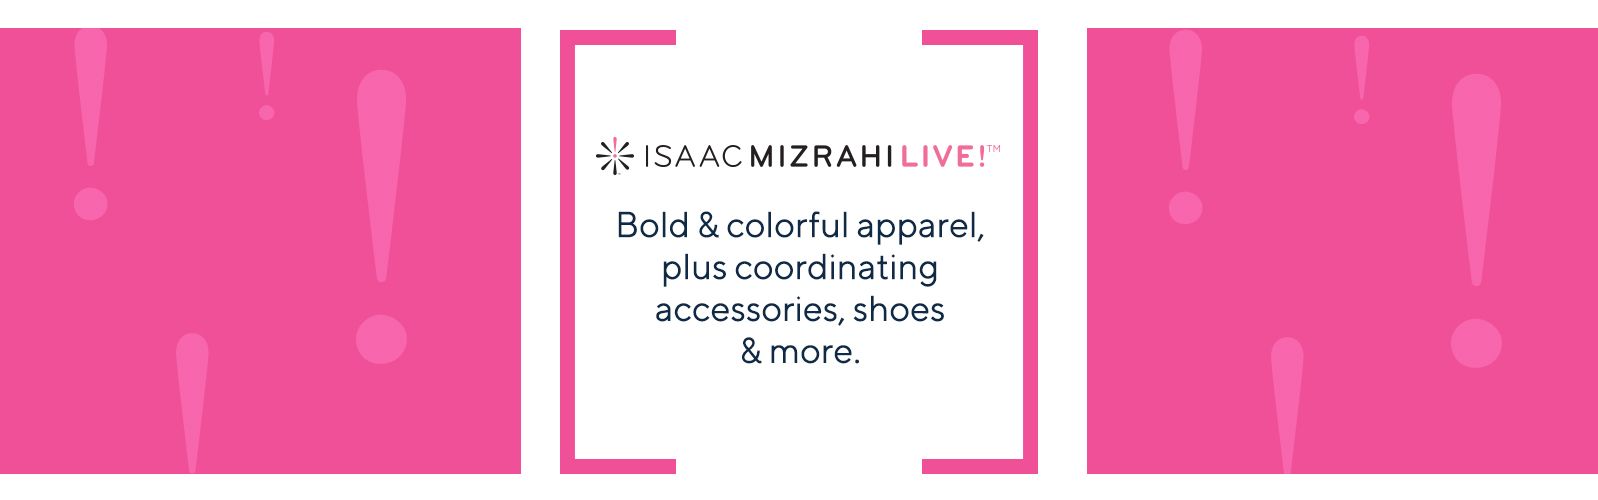 Isaac Mizrahi Live.  Bold & colorful apparel, plus coordinating accessories, shoes & more.